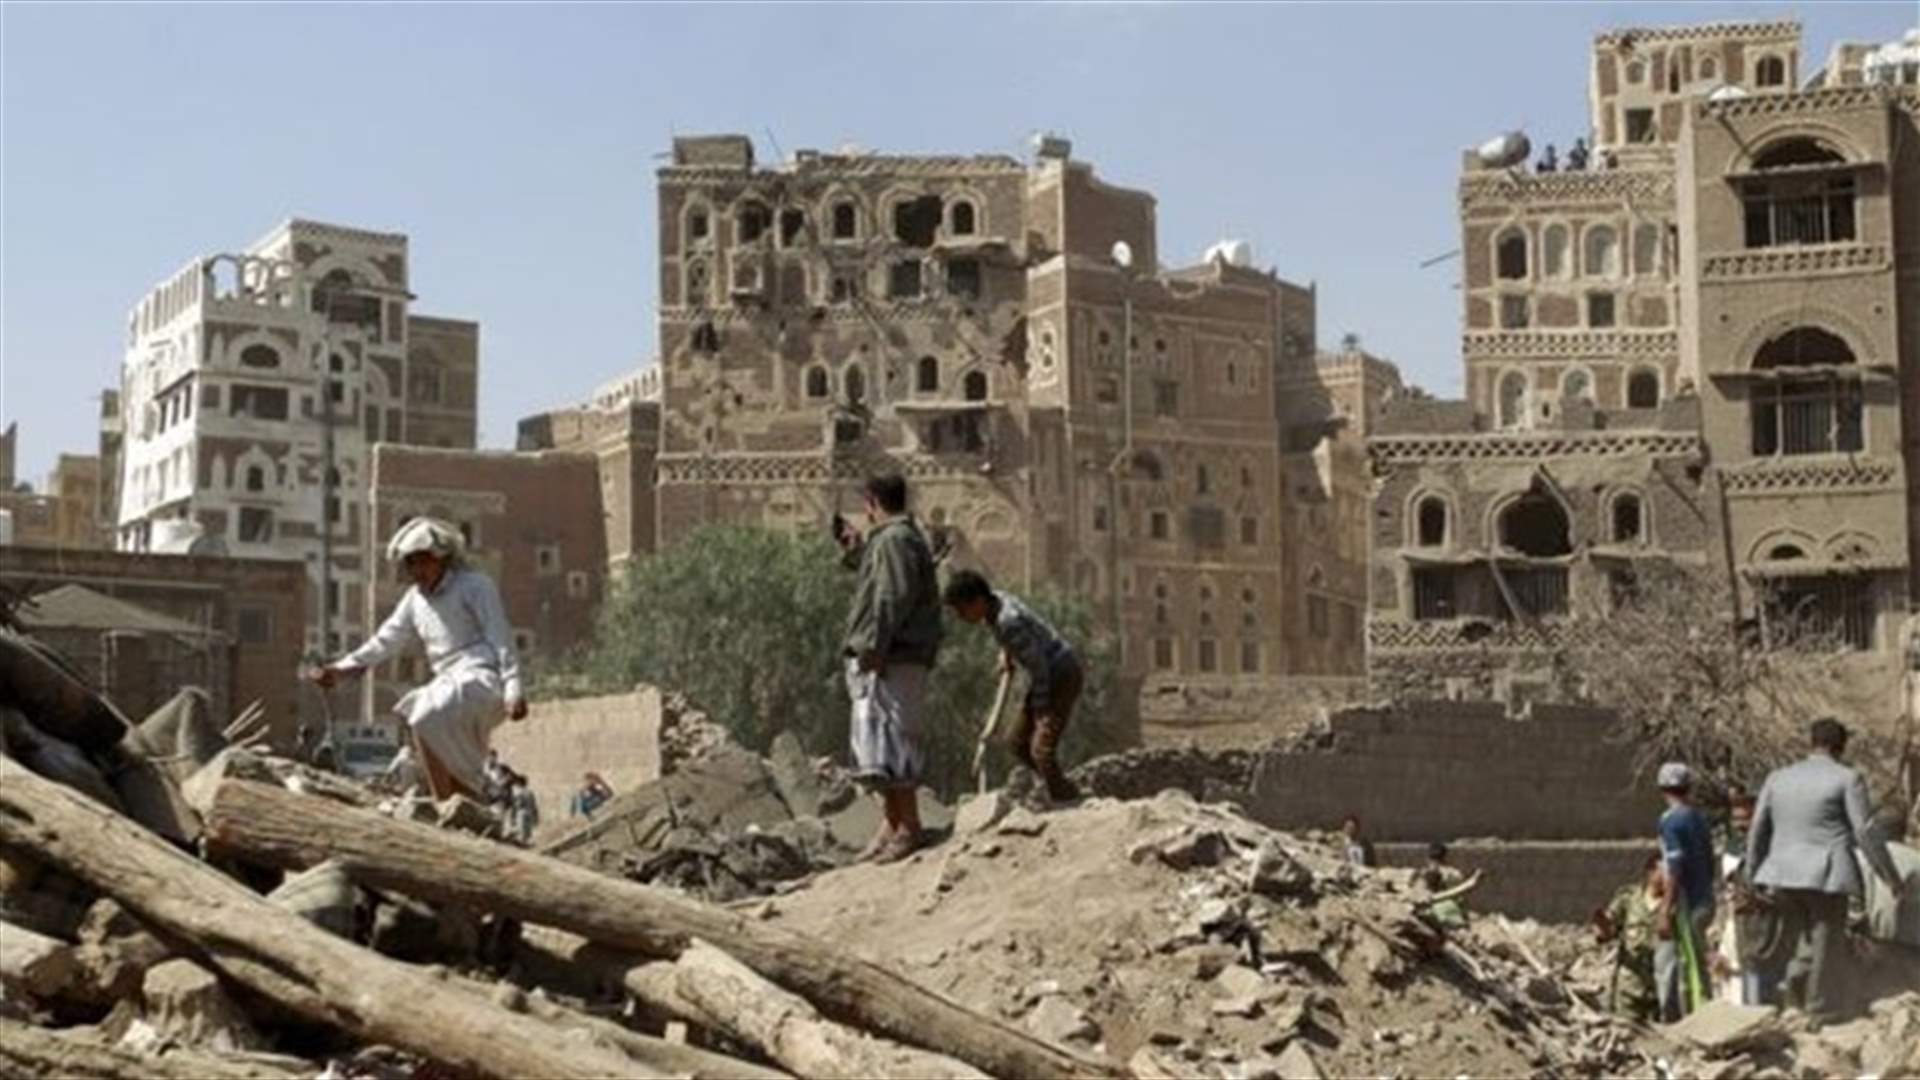 Suicide bombing kills soldiers in Yemen, claimed by Islamic State